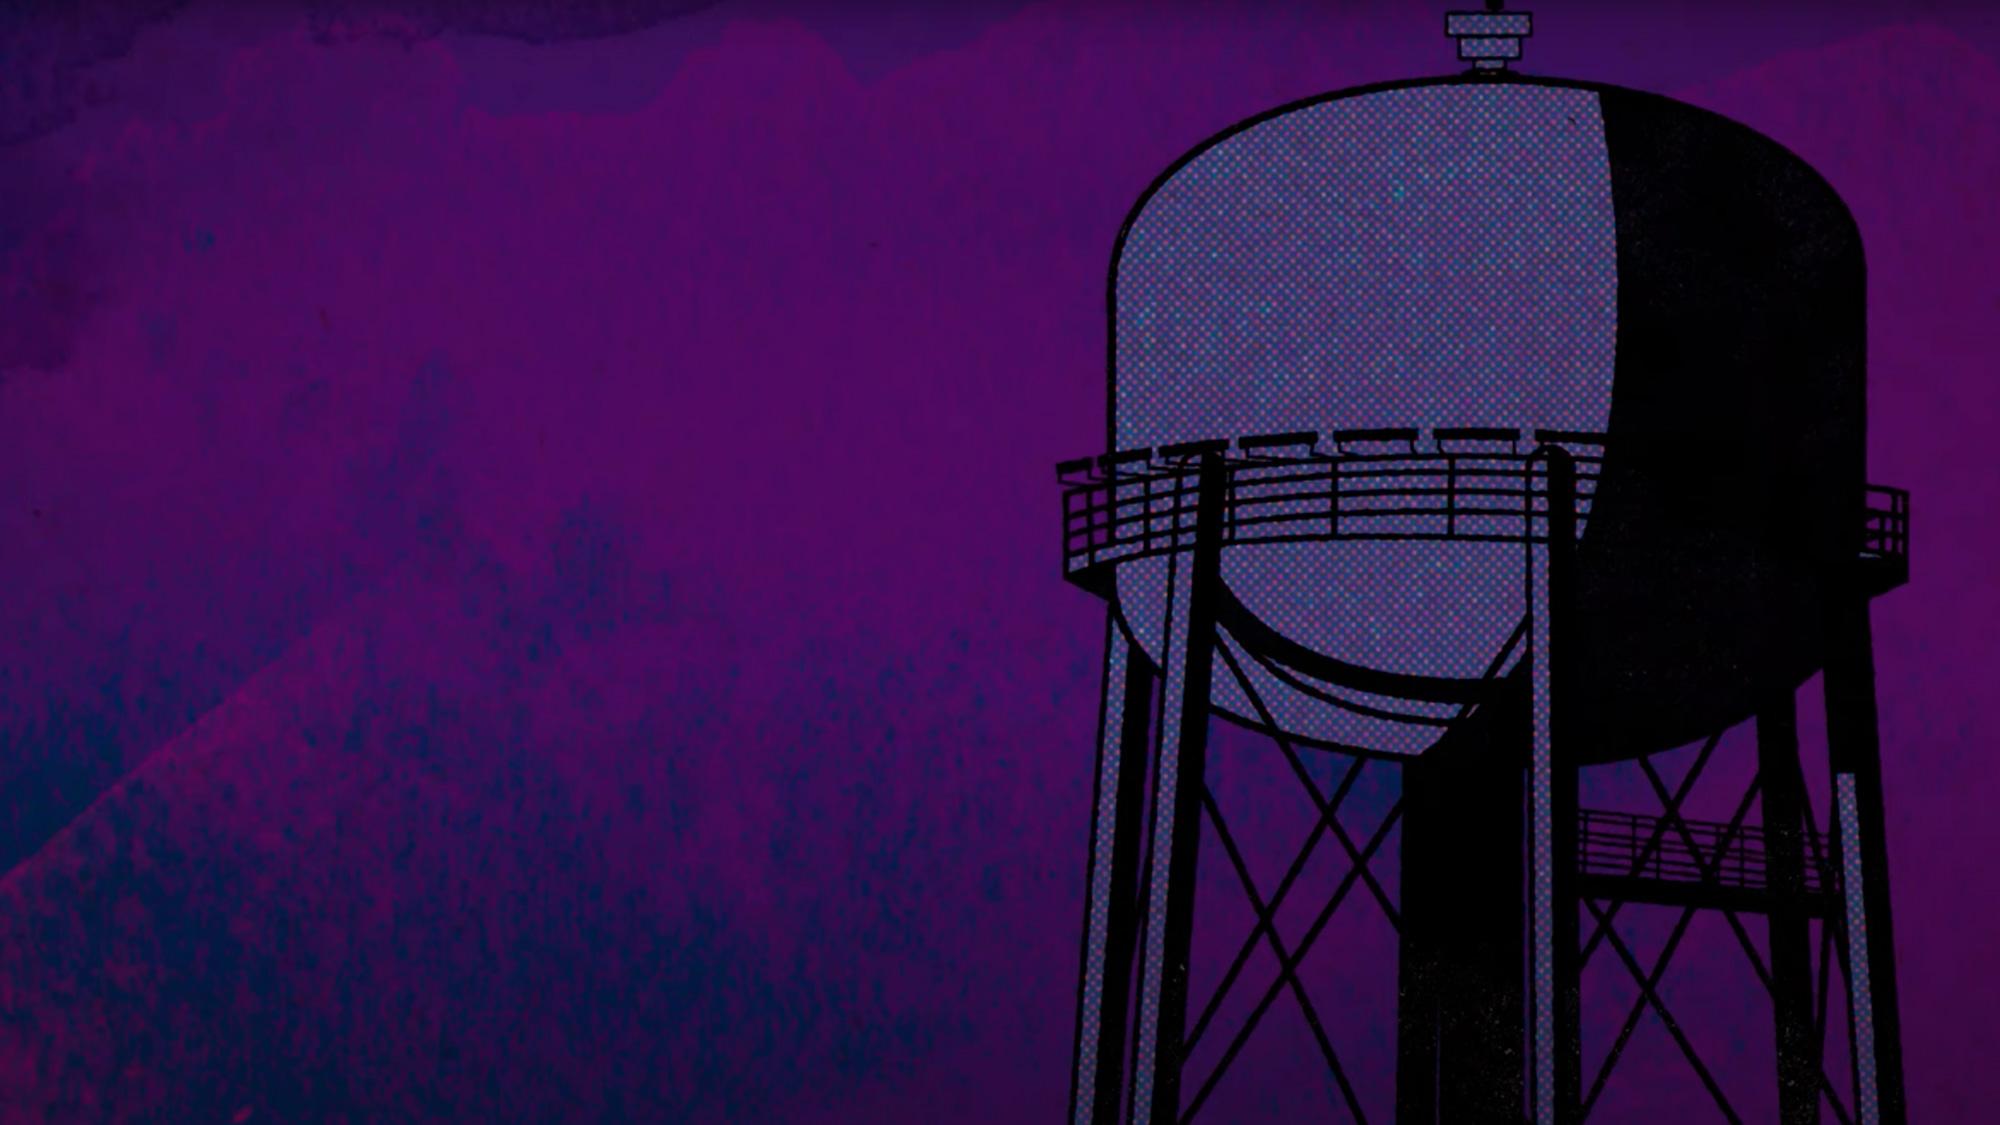 A comic book style illustration of the UC Davis water tower